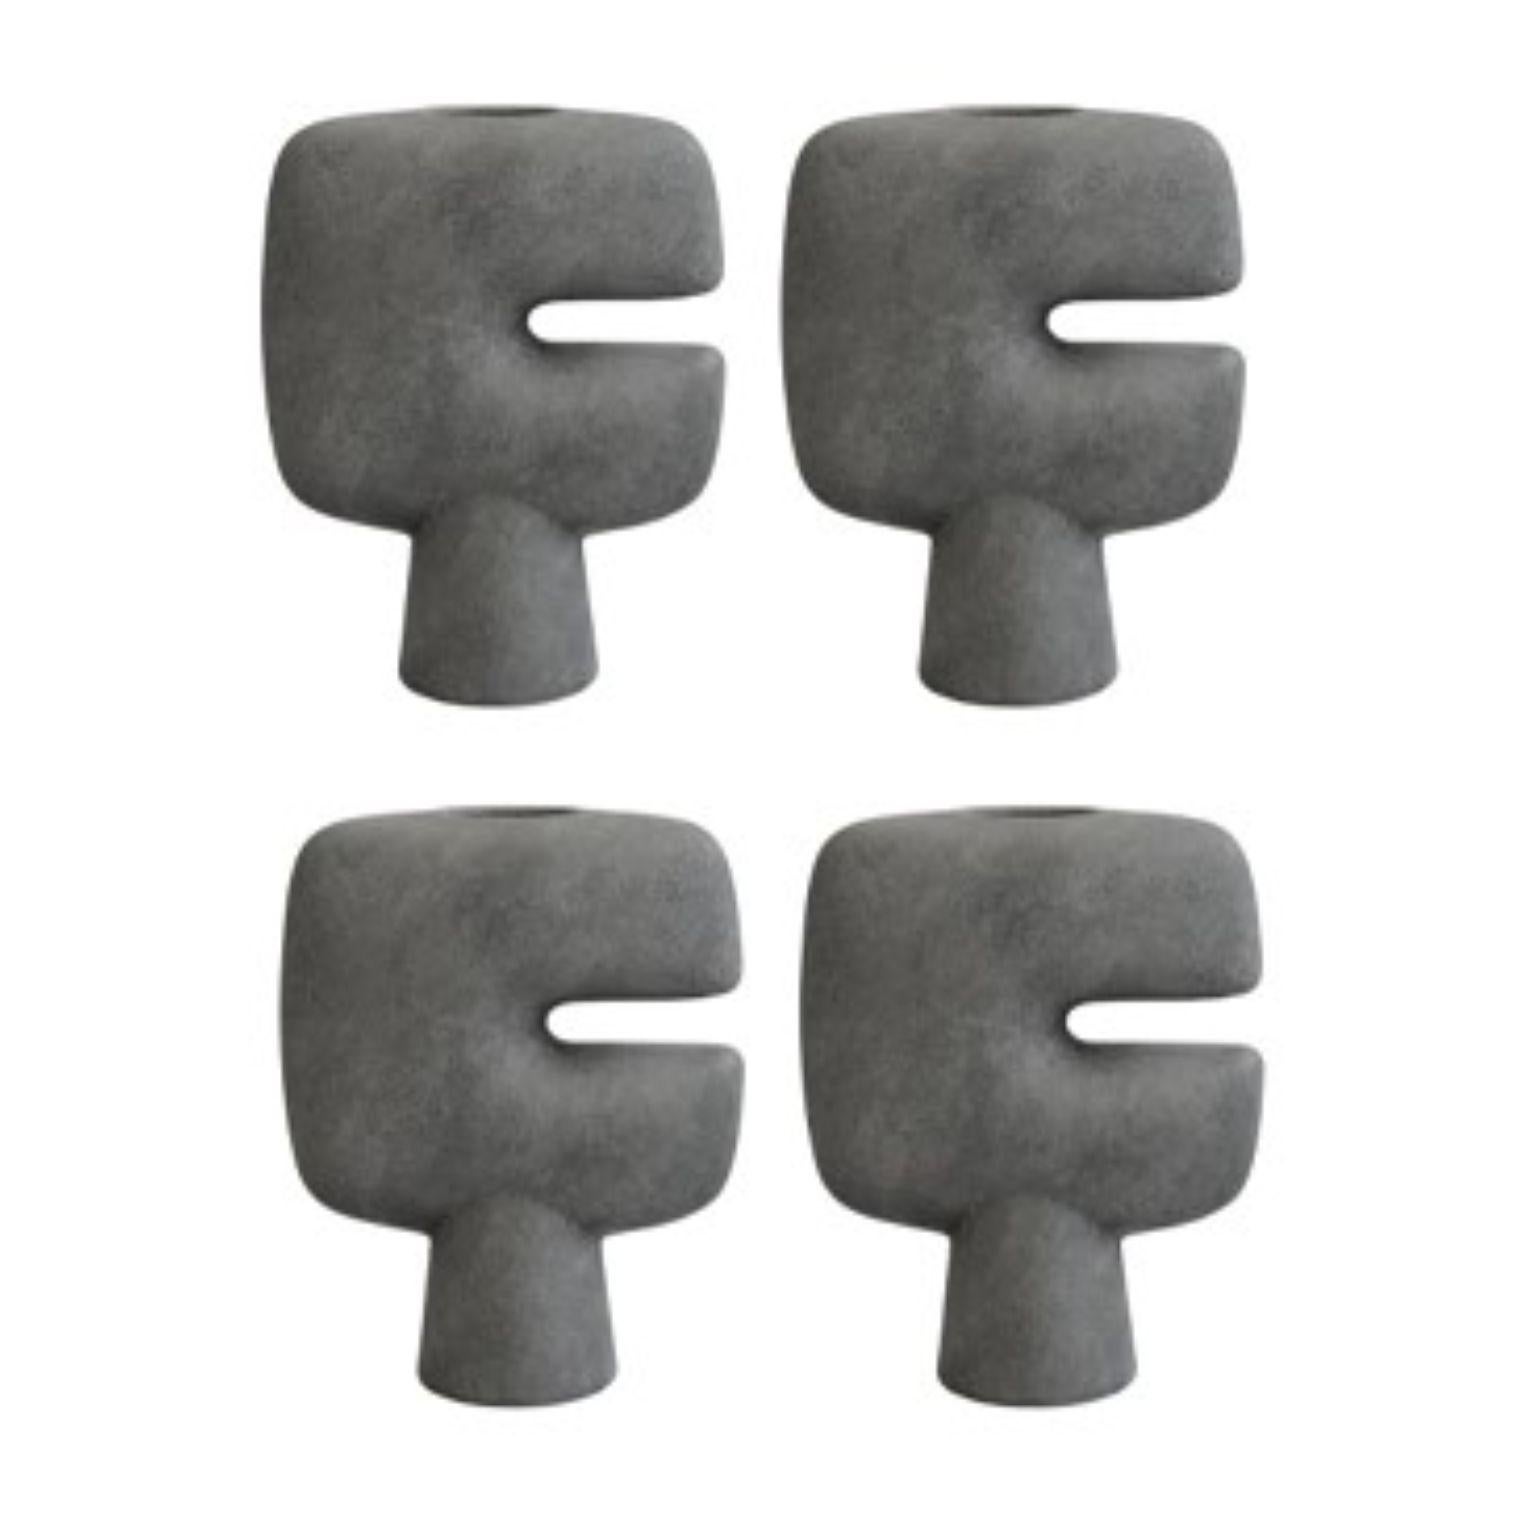 Set of 4 Dark Grey tribal vases mini by 101 Copenhagen
Designed by Kristian Sofus Hansen & Tommy Hyldahl.
Dimensions: L 21 / W 9 / H 25.5 cm.
Materials: ceramic

The Tribal collection is a series of vases designed as a sculptural take on the